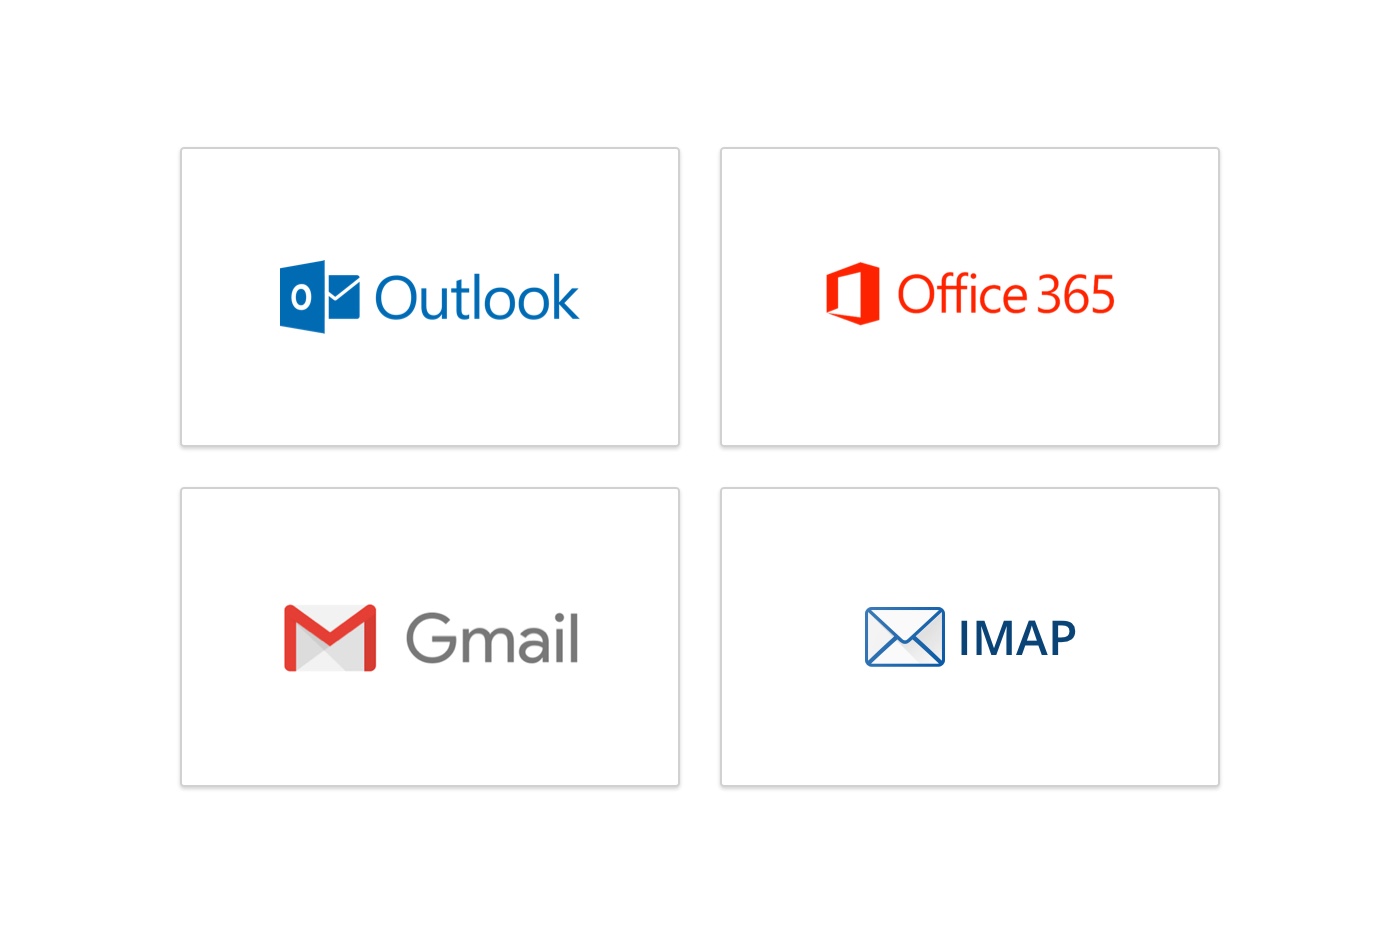 connect to outlook or gmail